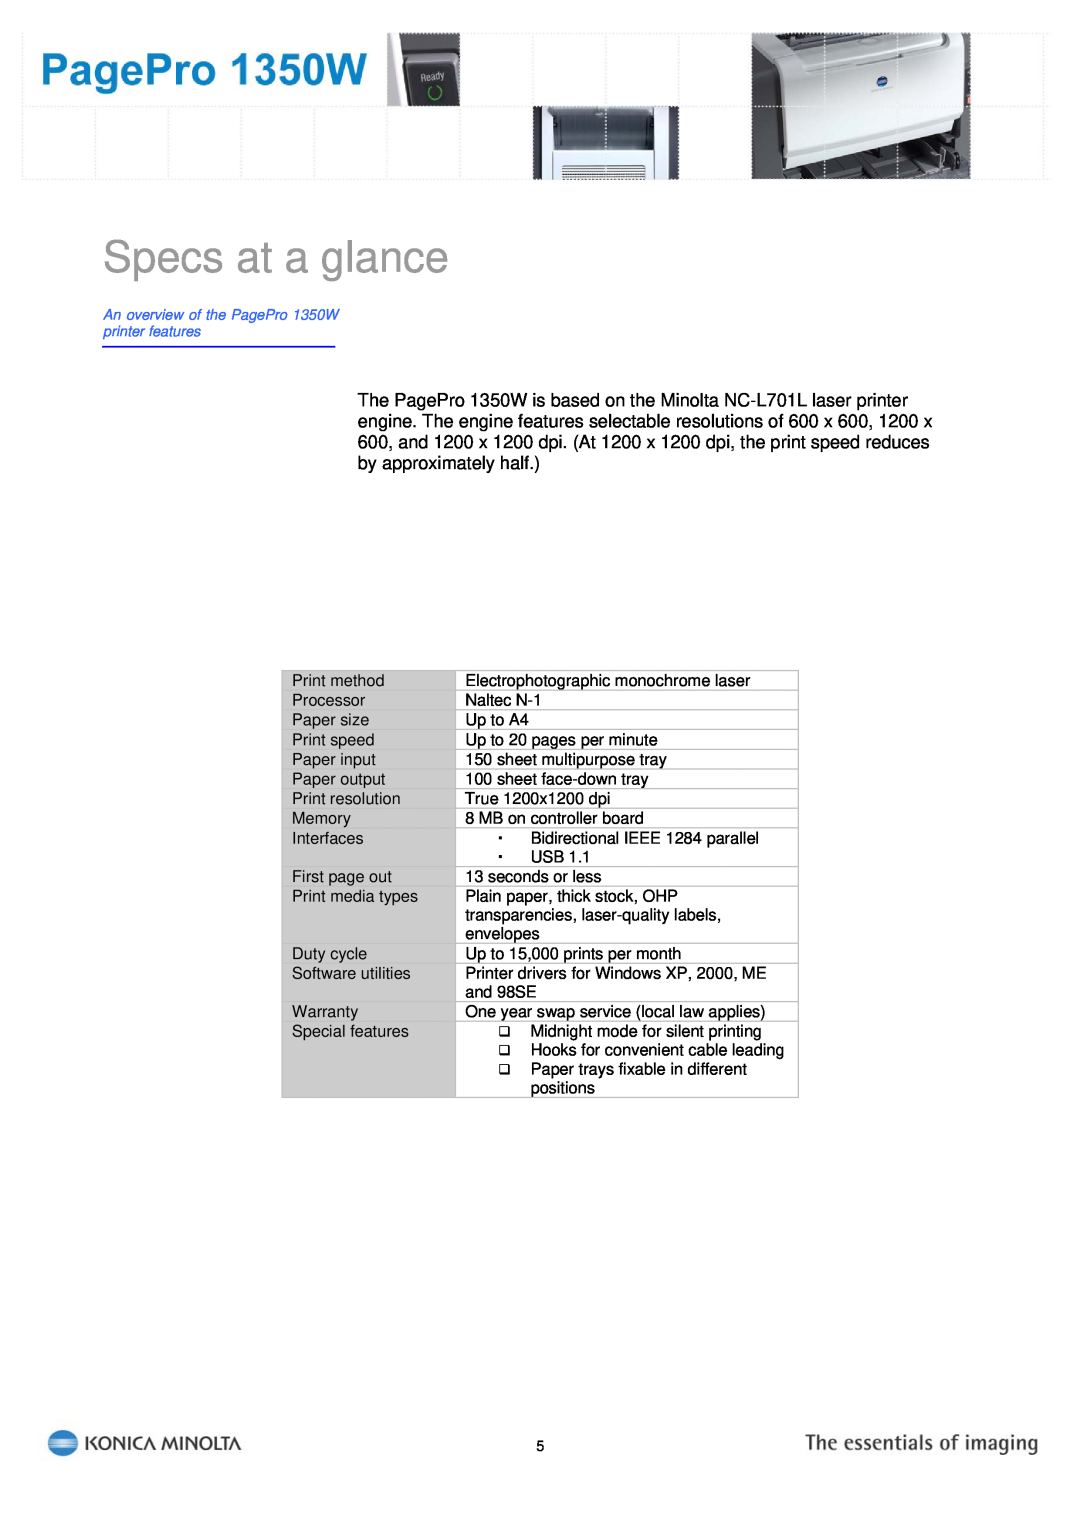 Konica Minolta PagePro 1350W manual Specs at a glance 